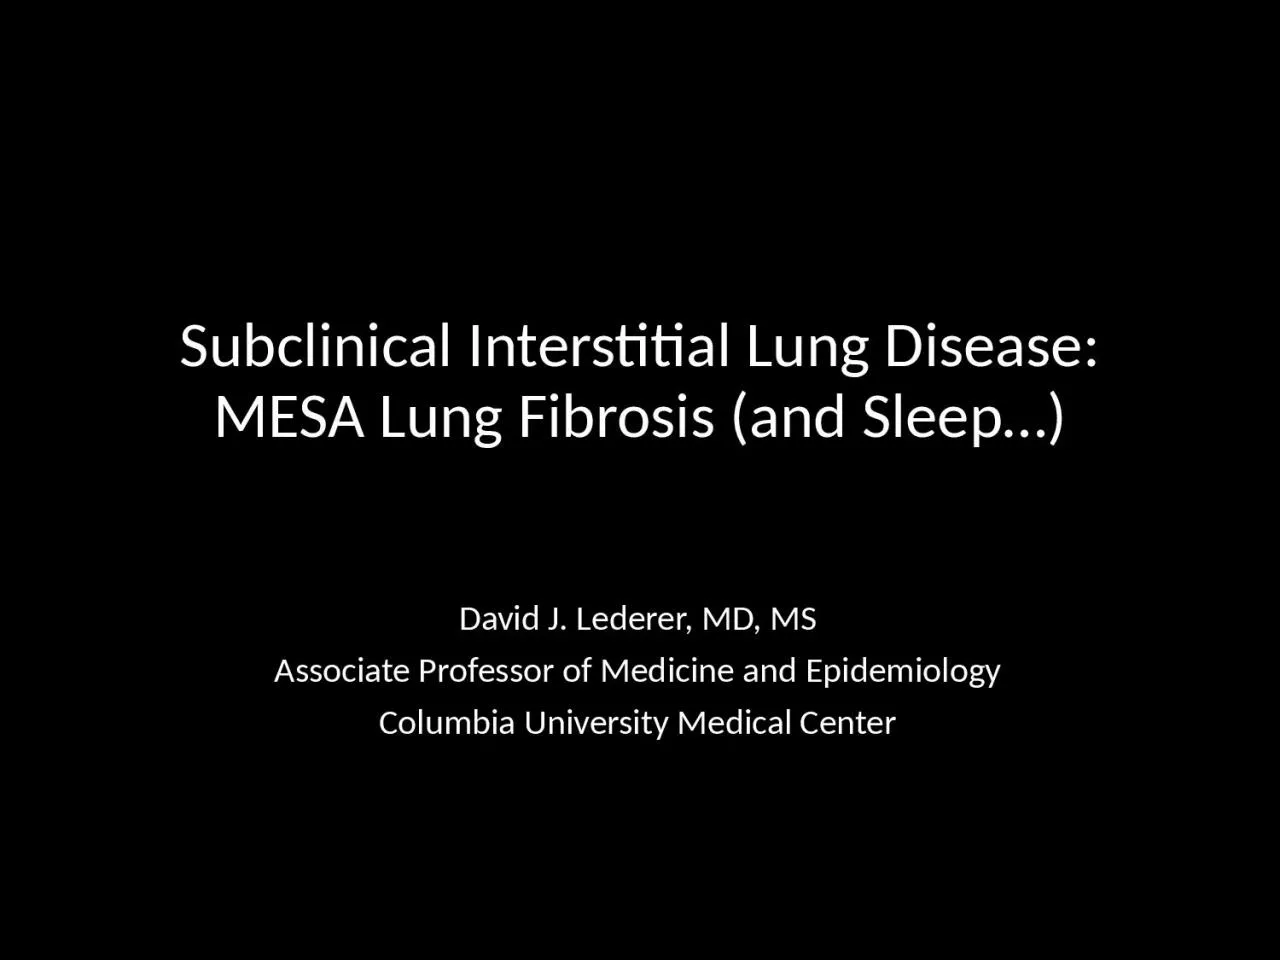 Subclinical Interstitial Lung Disease: